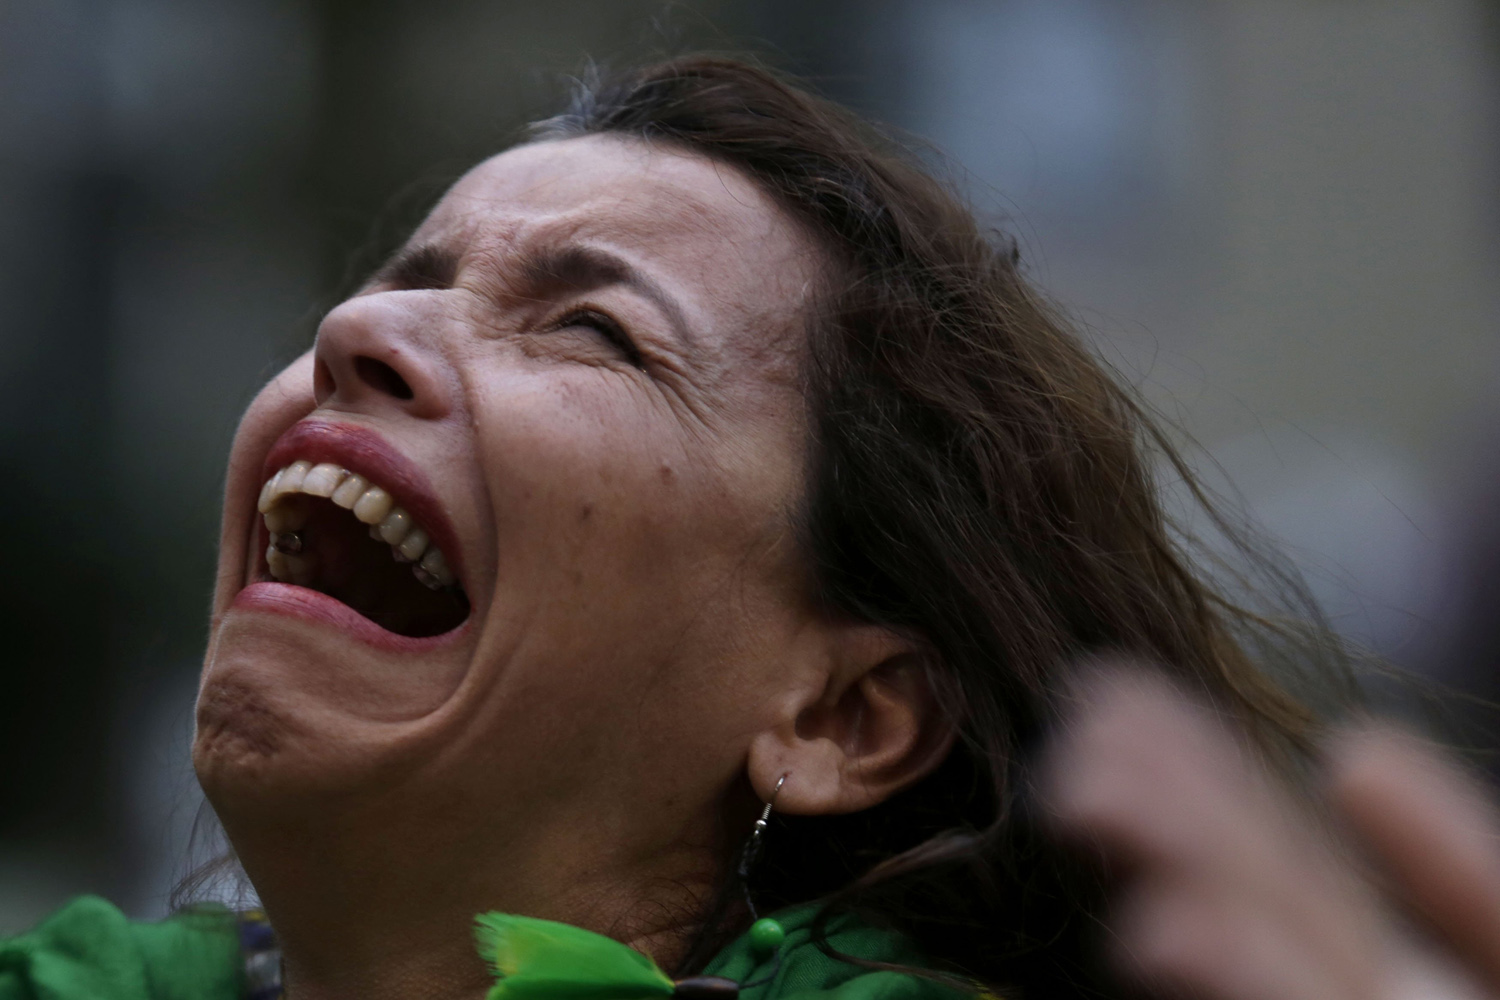 Jul. 8, 2014. A Brazilian soccer fan cries as she watches a live telecast of the semifinals World Cup soccer match between Brazil and Germany in Belo Horizonte, Brazil.